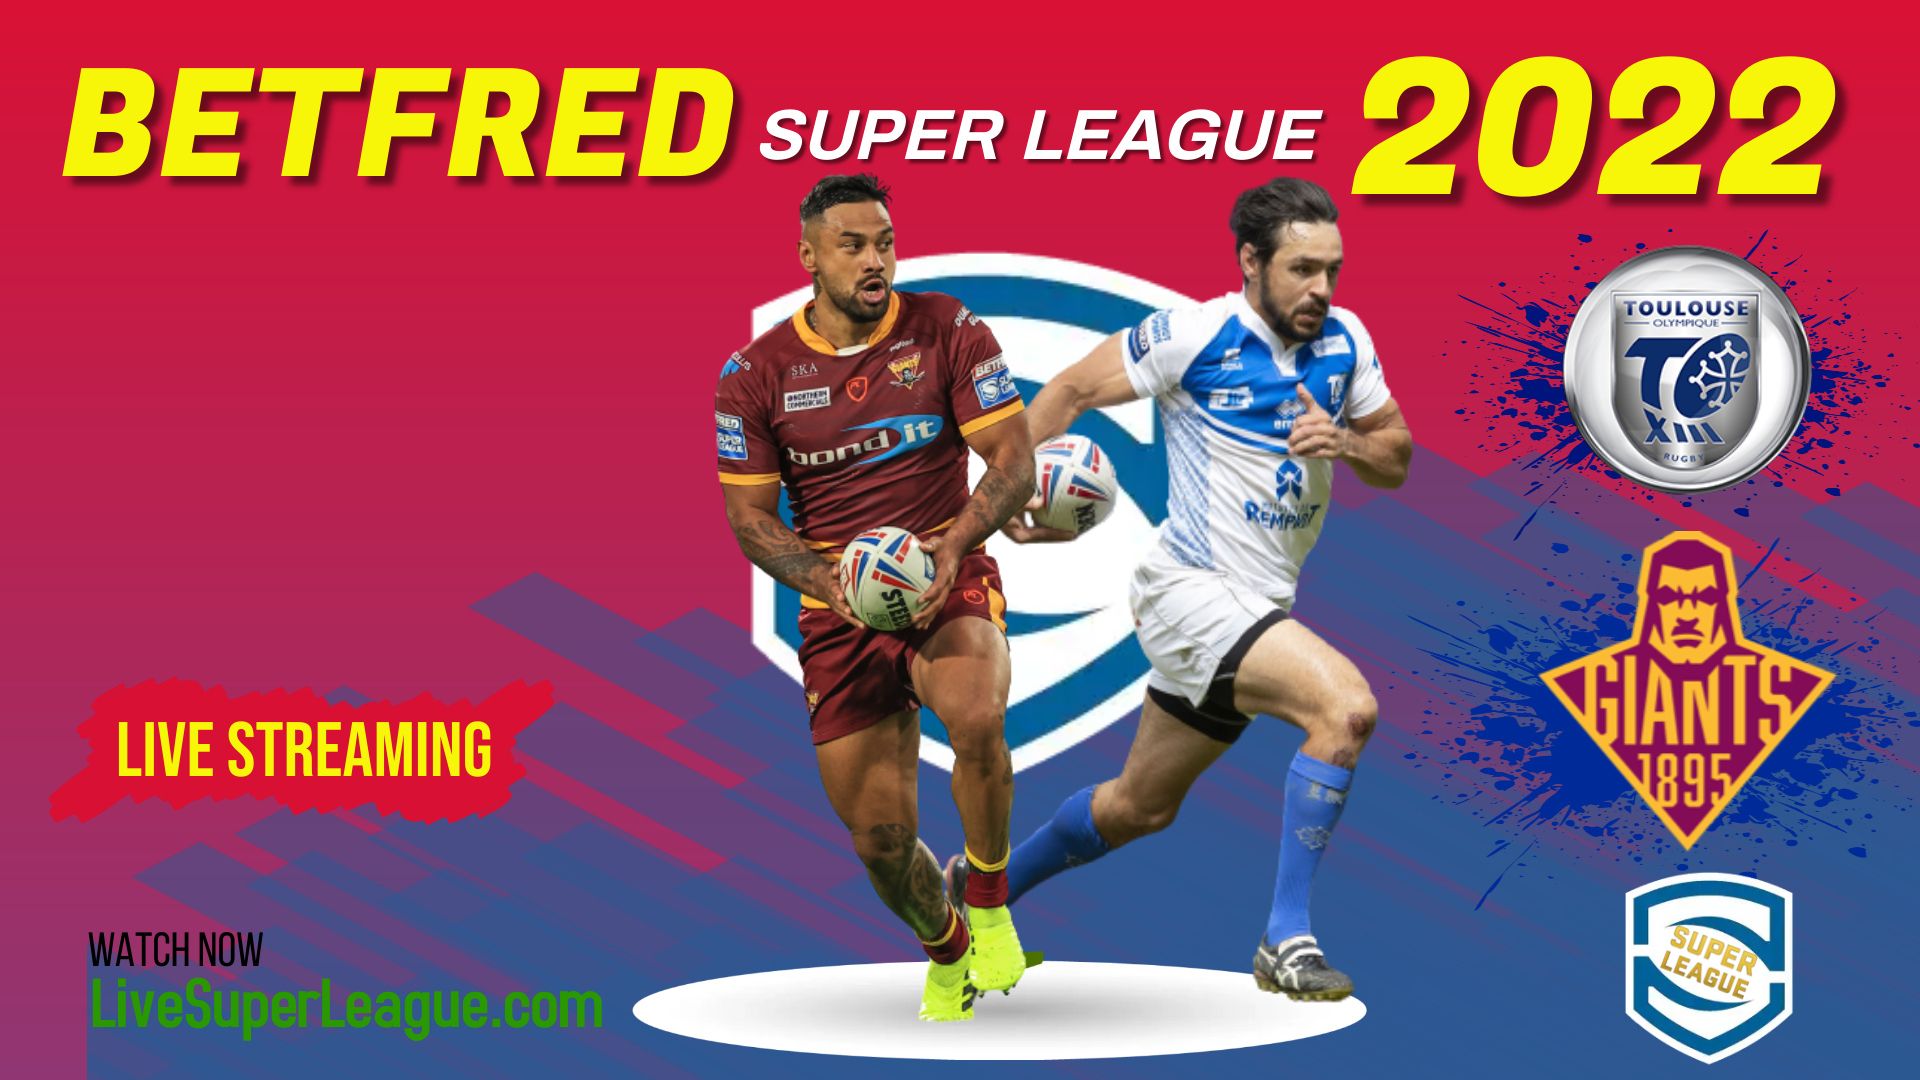 Toulouse Vs Huddersfield Giants RD 1 Live Stream 2022 | Full Match Replay